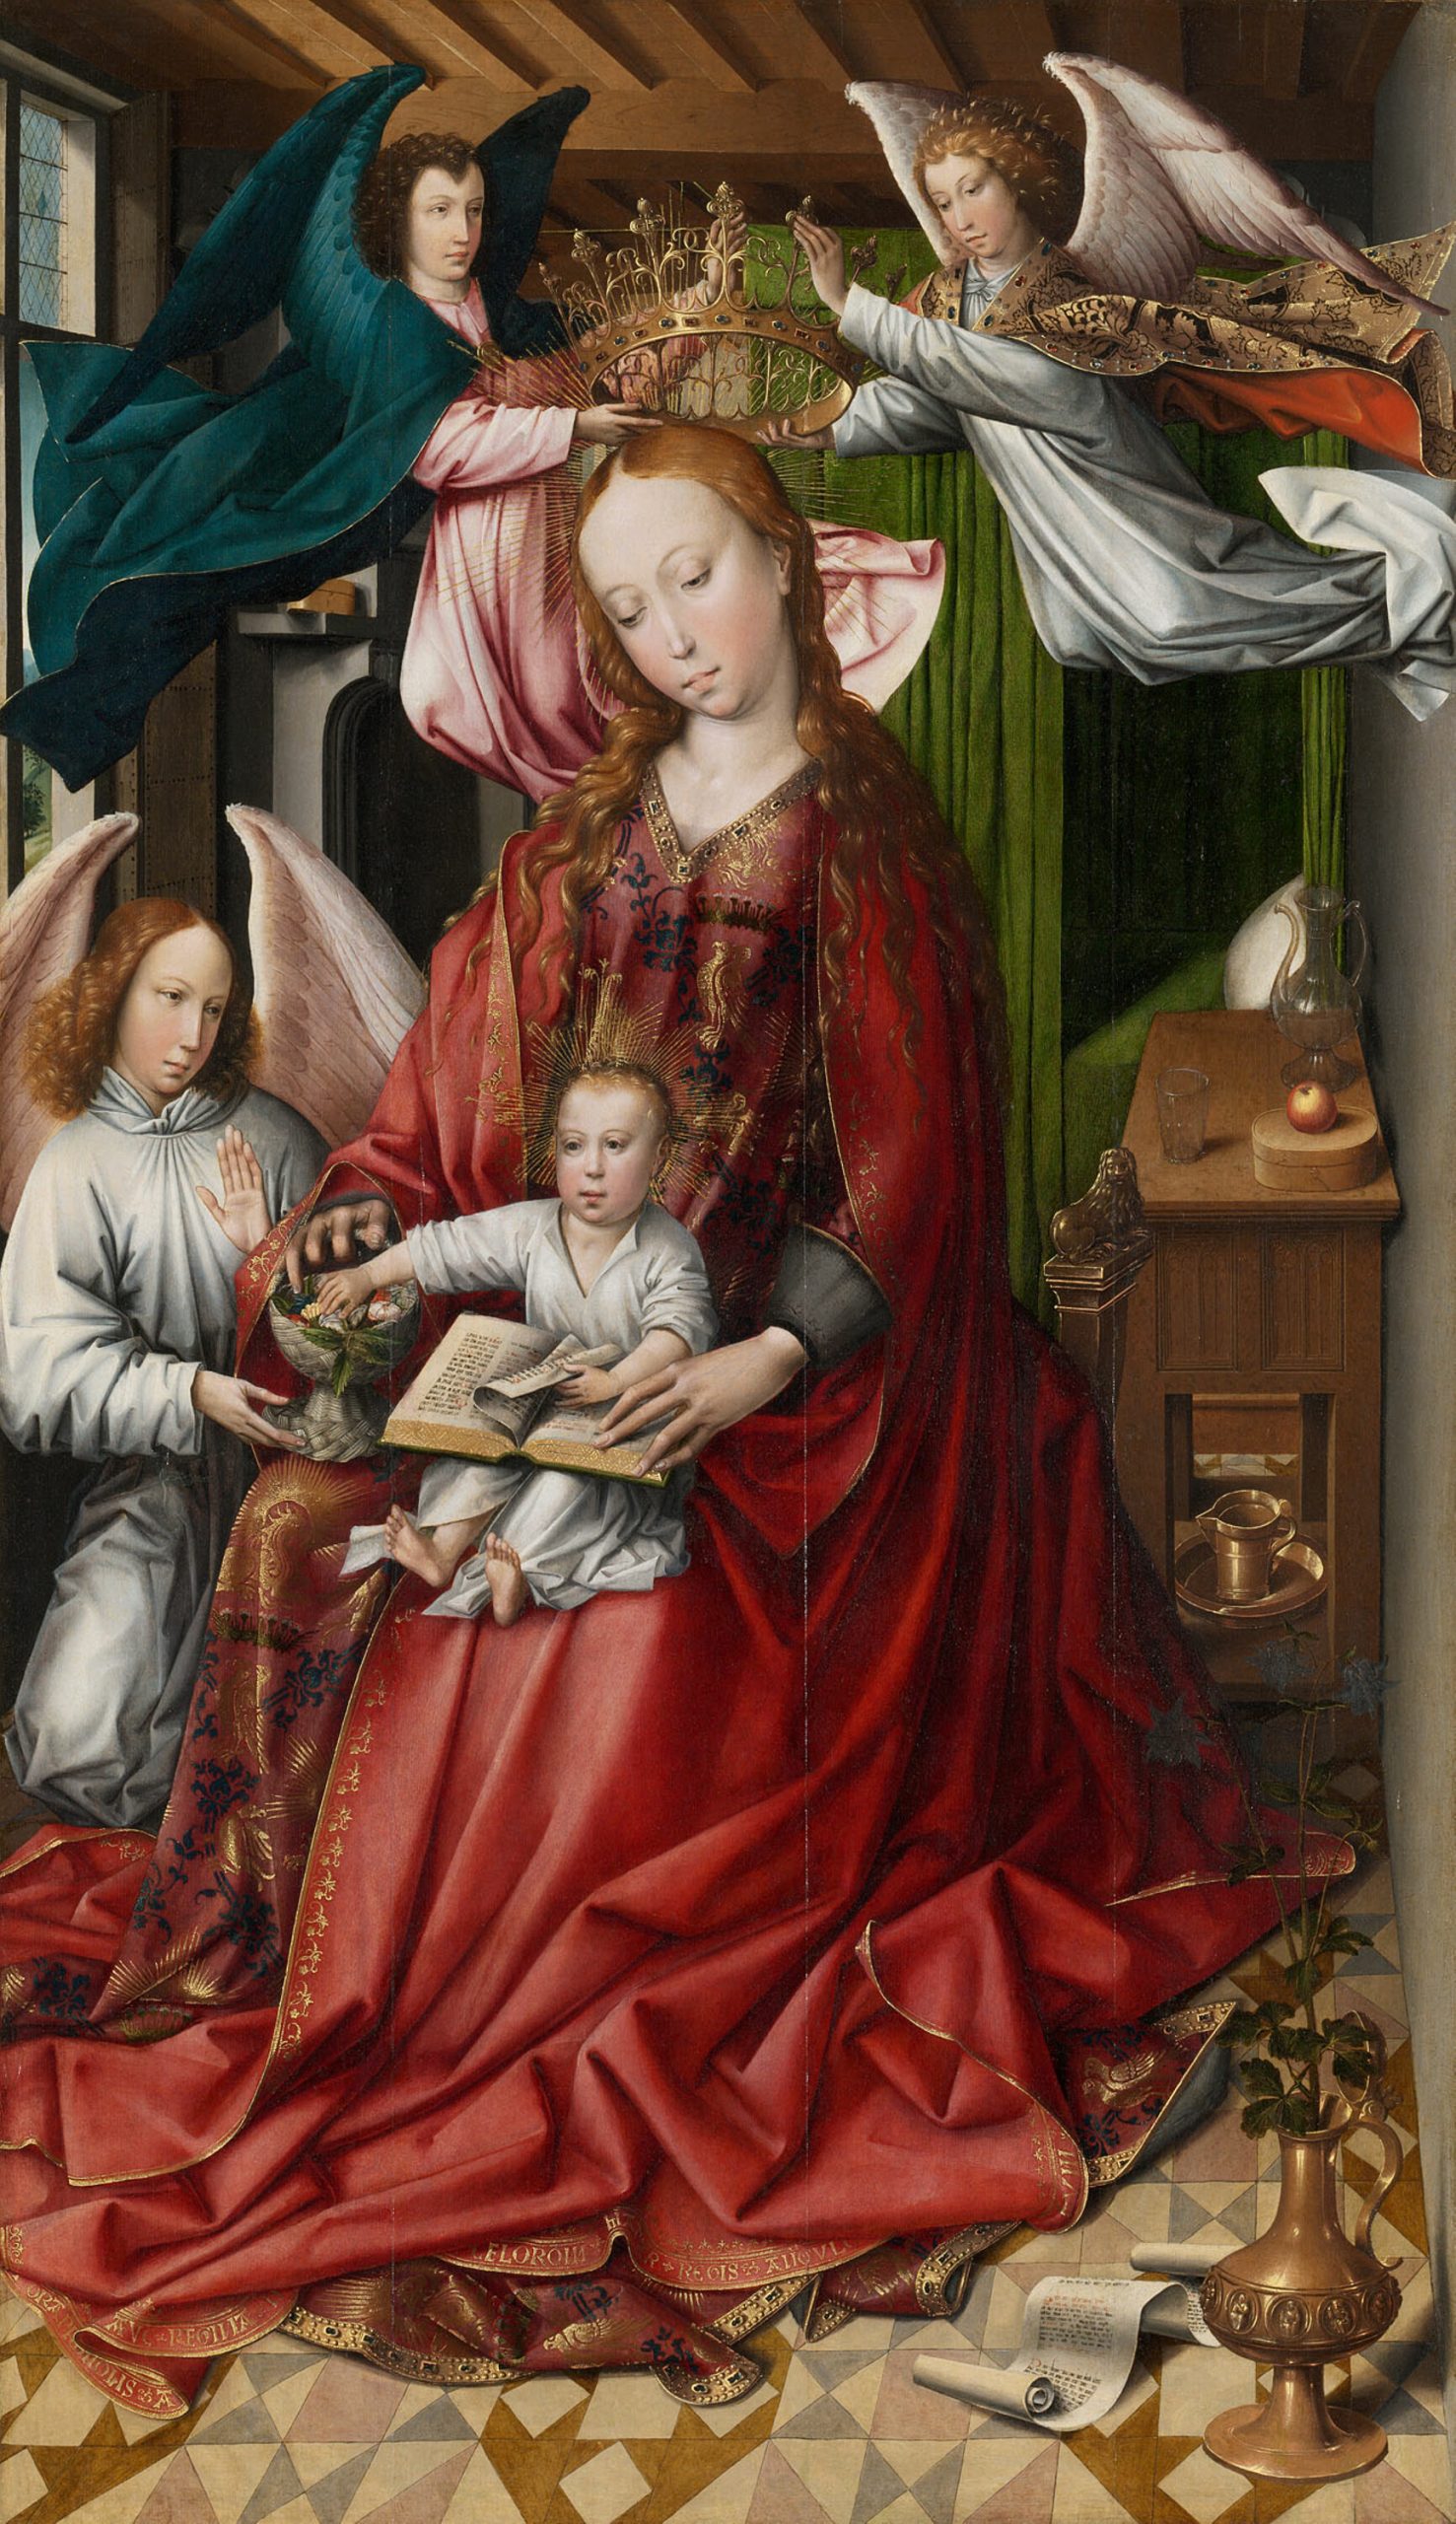 A woman in a dress sits with a baby on her lap who holds a book while angels surround the woman and place a crown on her head.